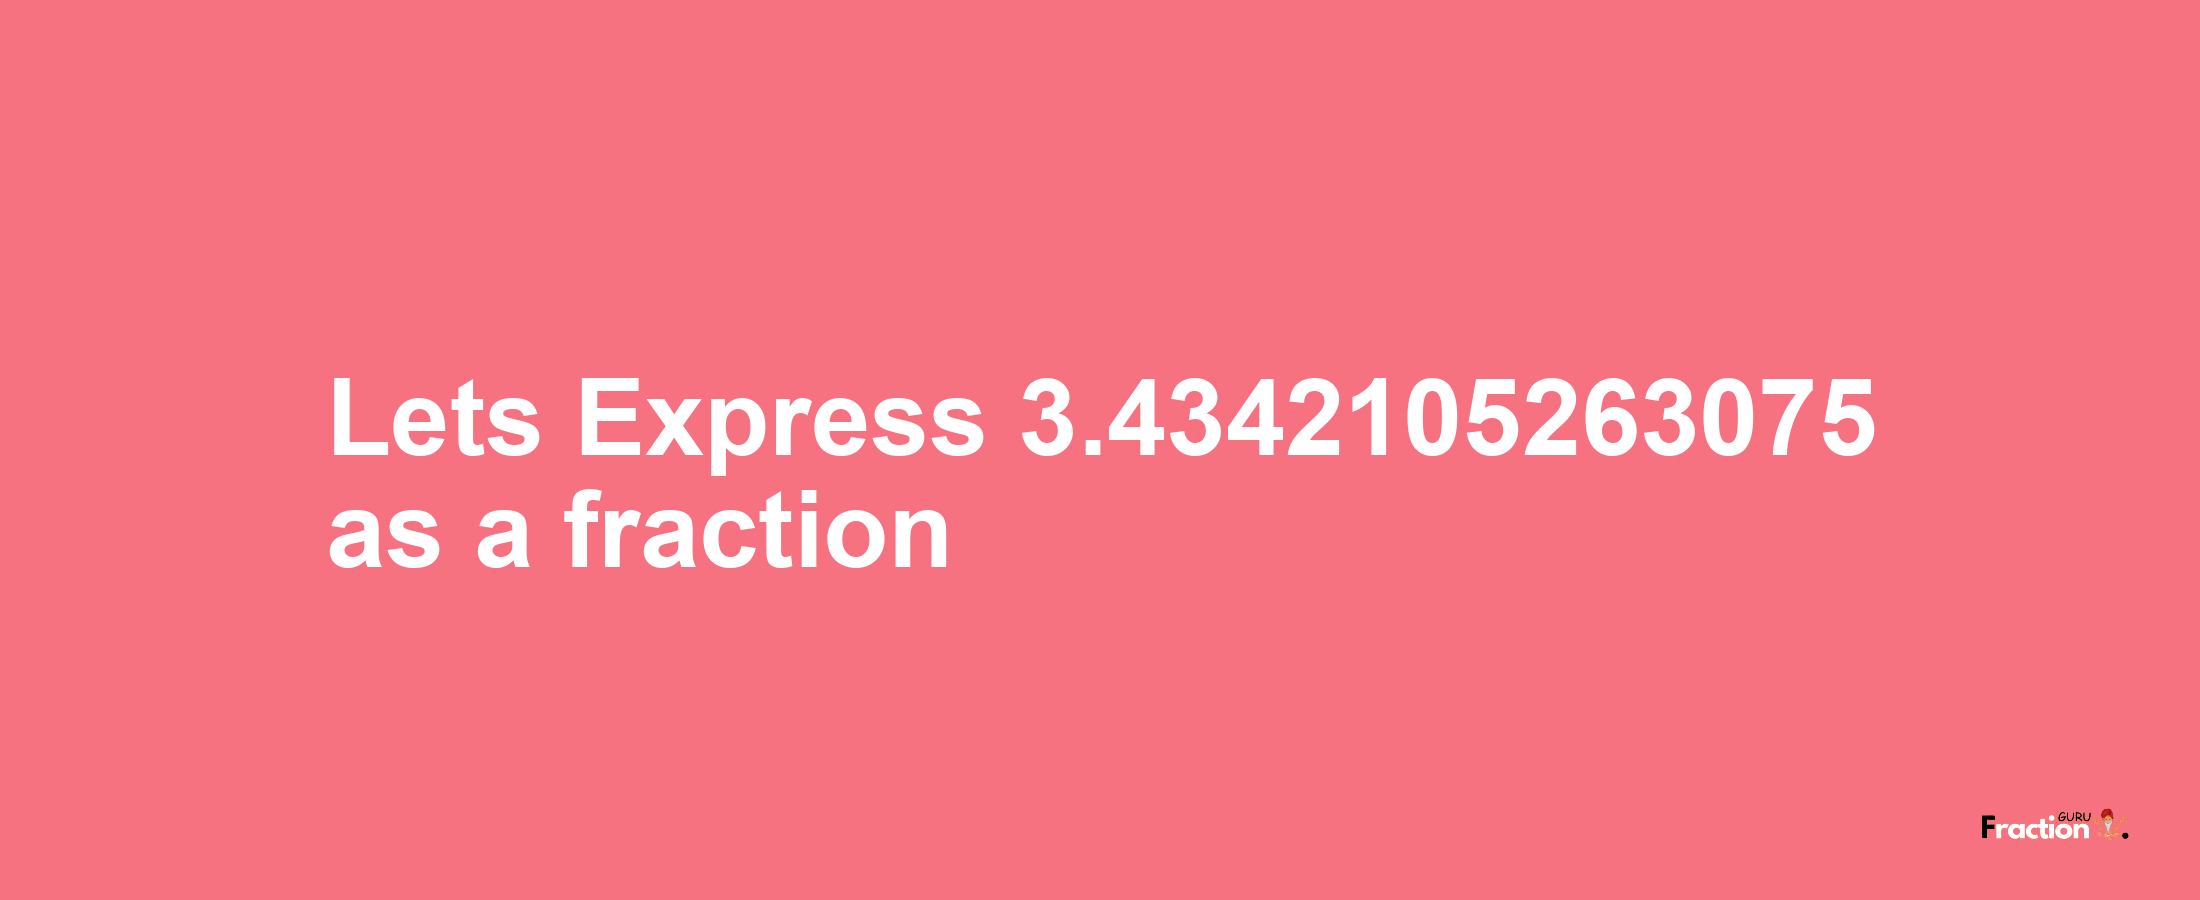 Lets Express 3.4342105263075 as afraction